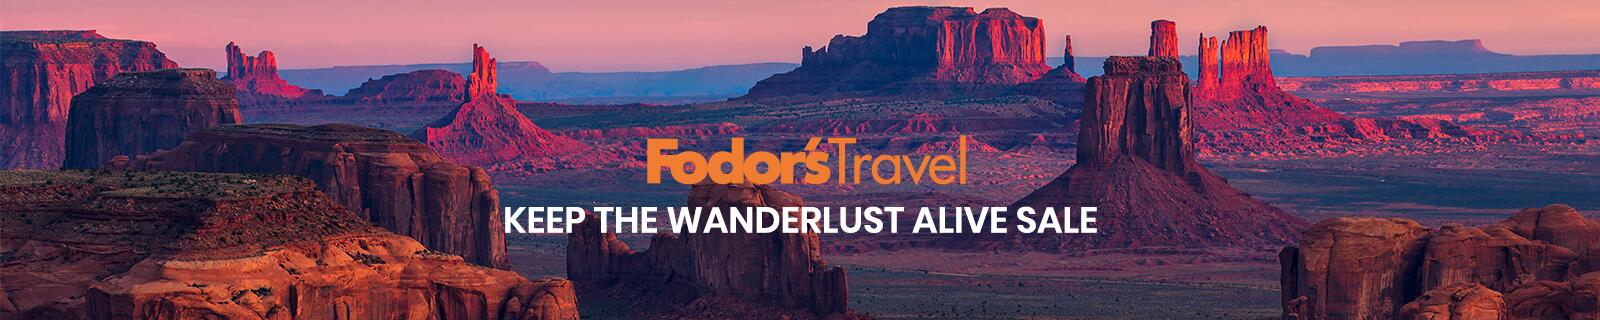 Fodors Travel Guide